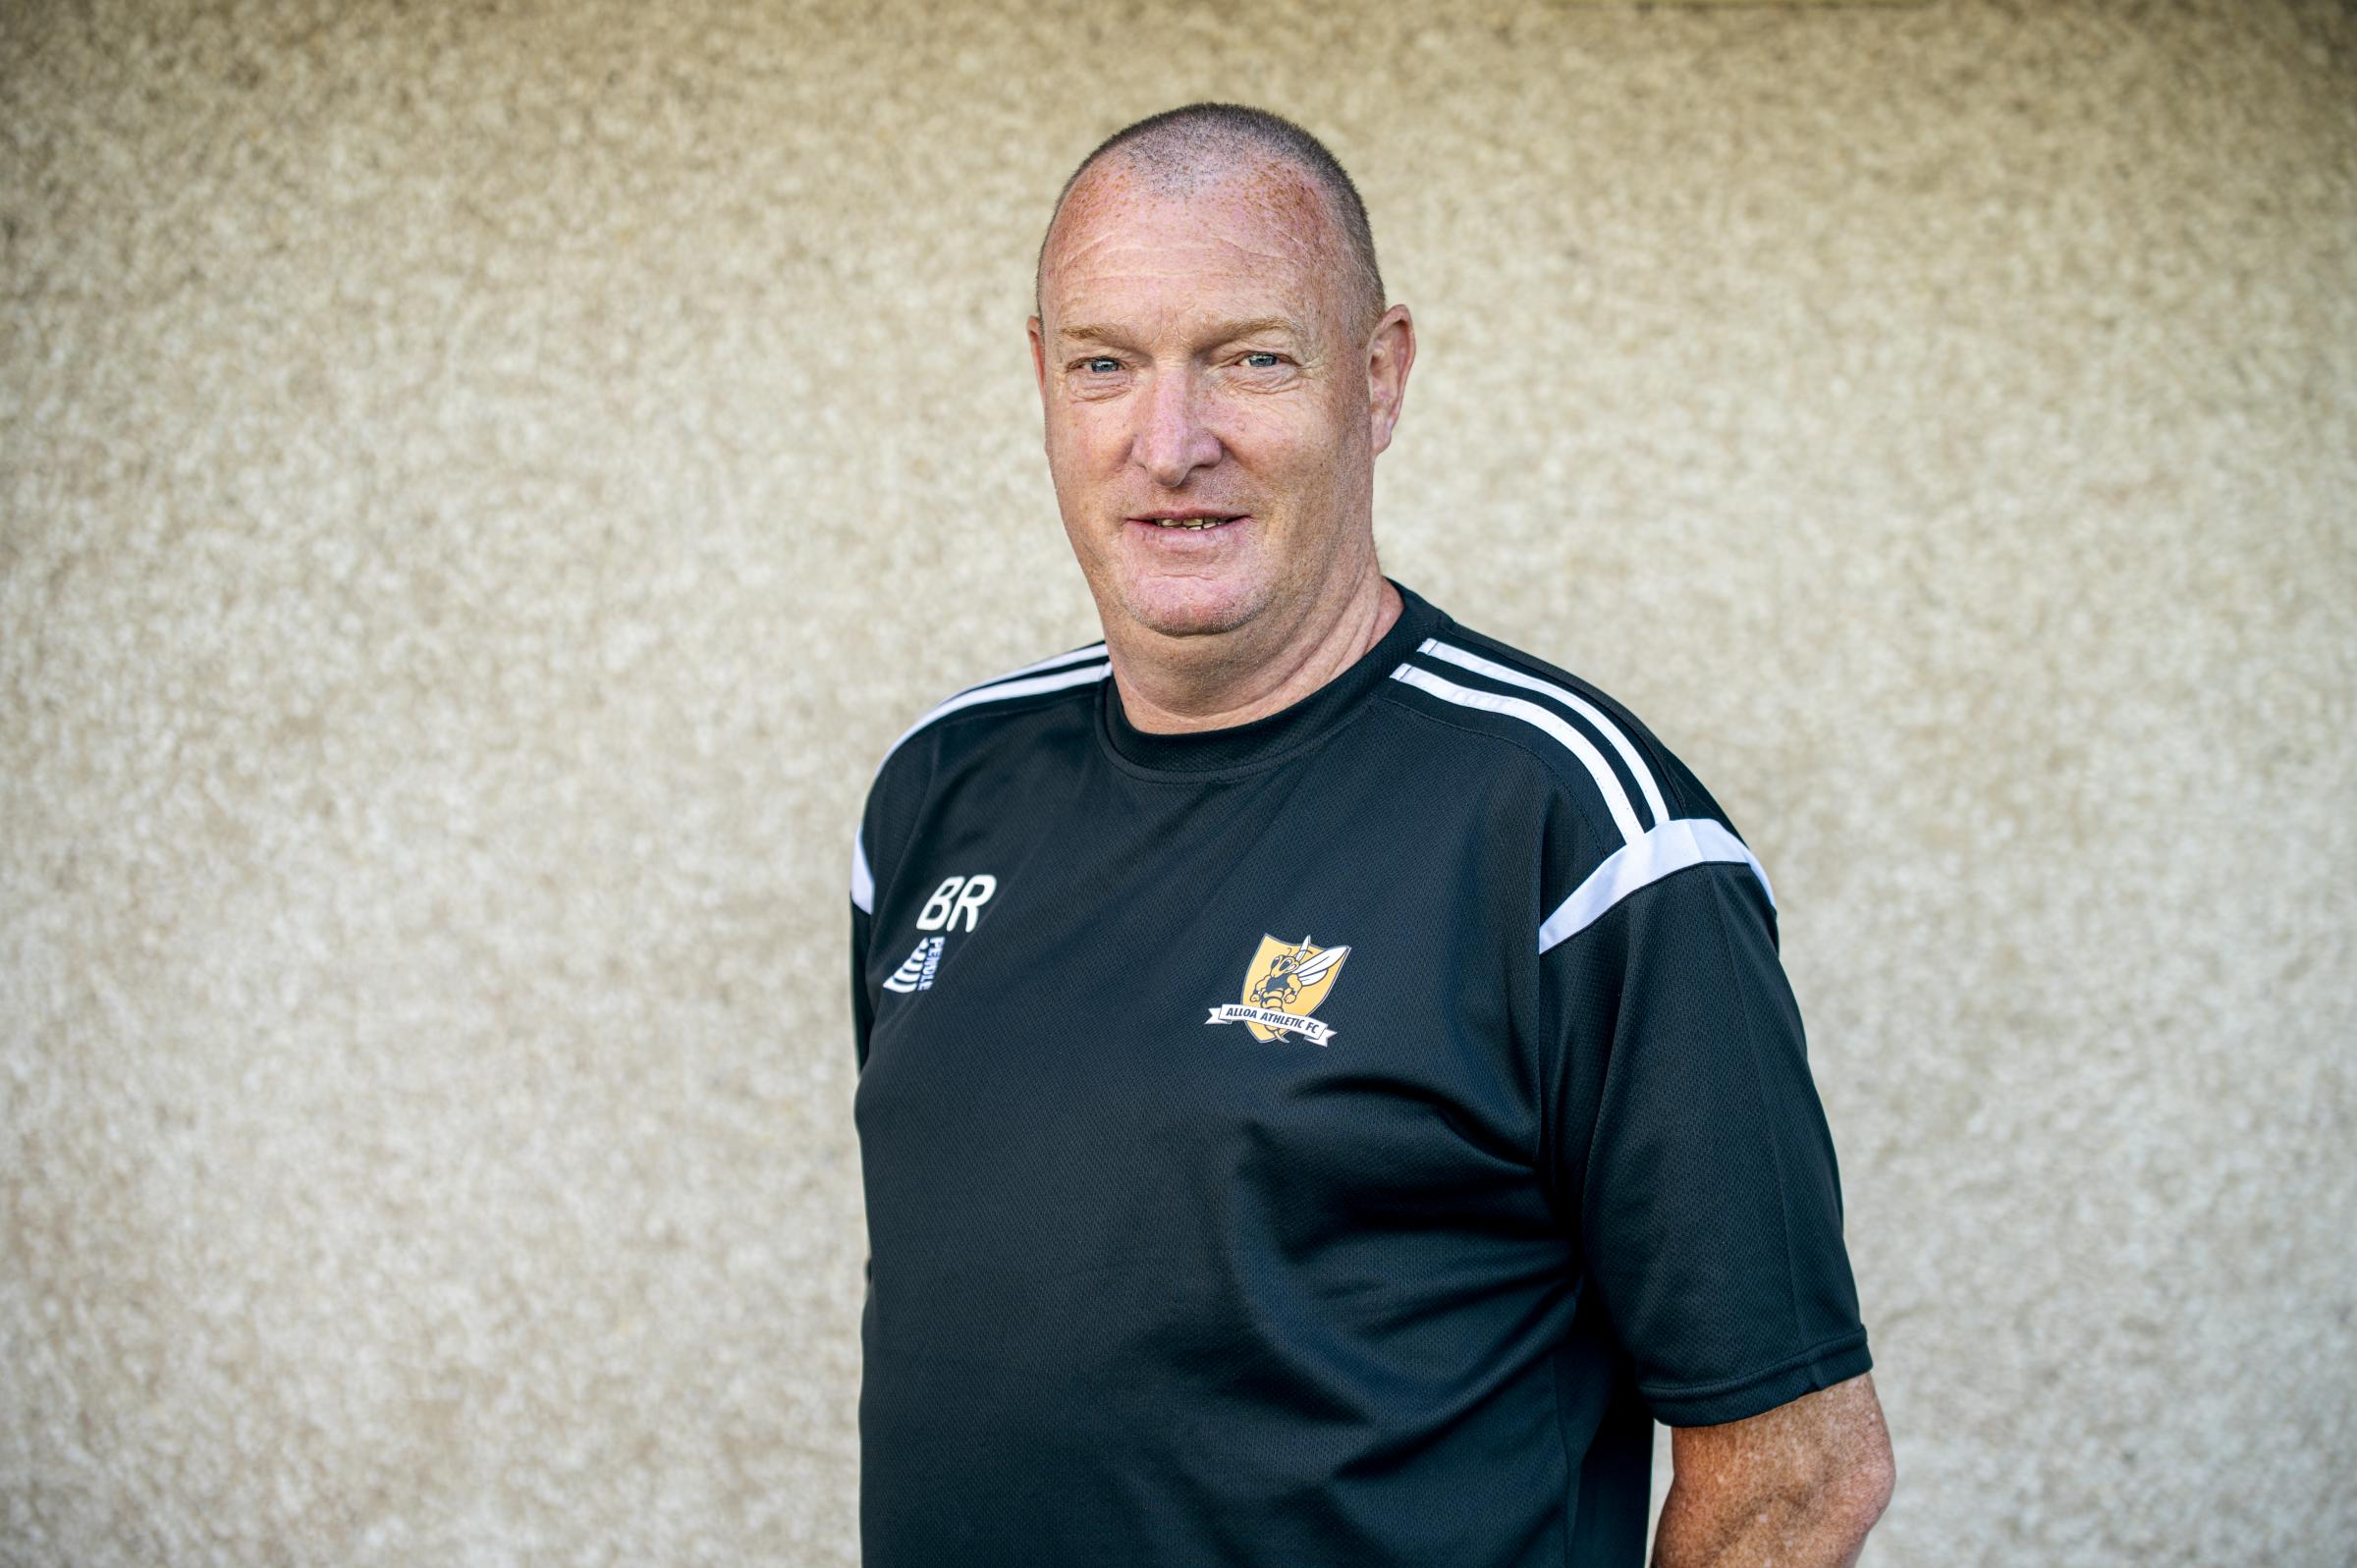 Alloa manager feels his side are 'ready to go' for new season